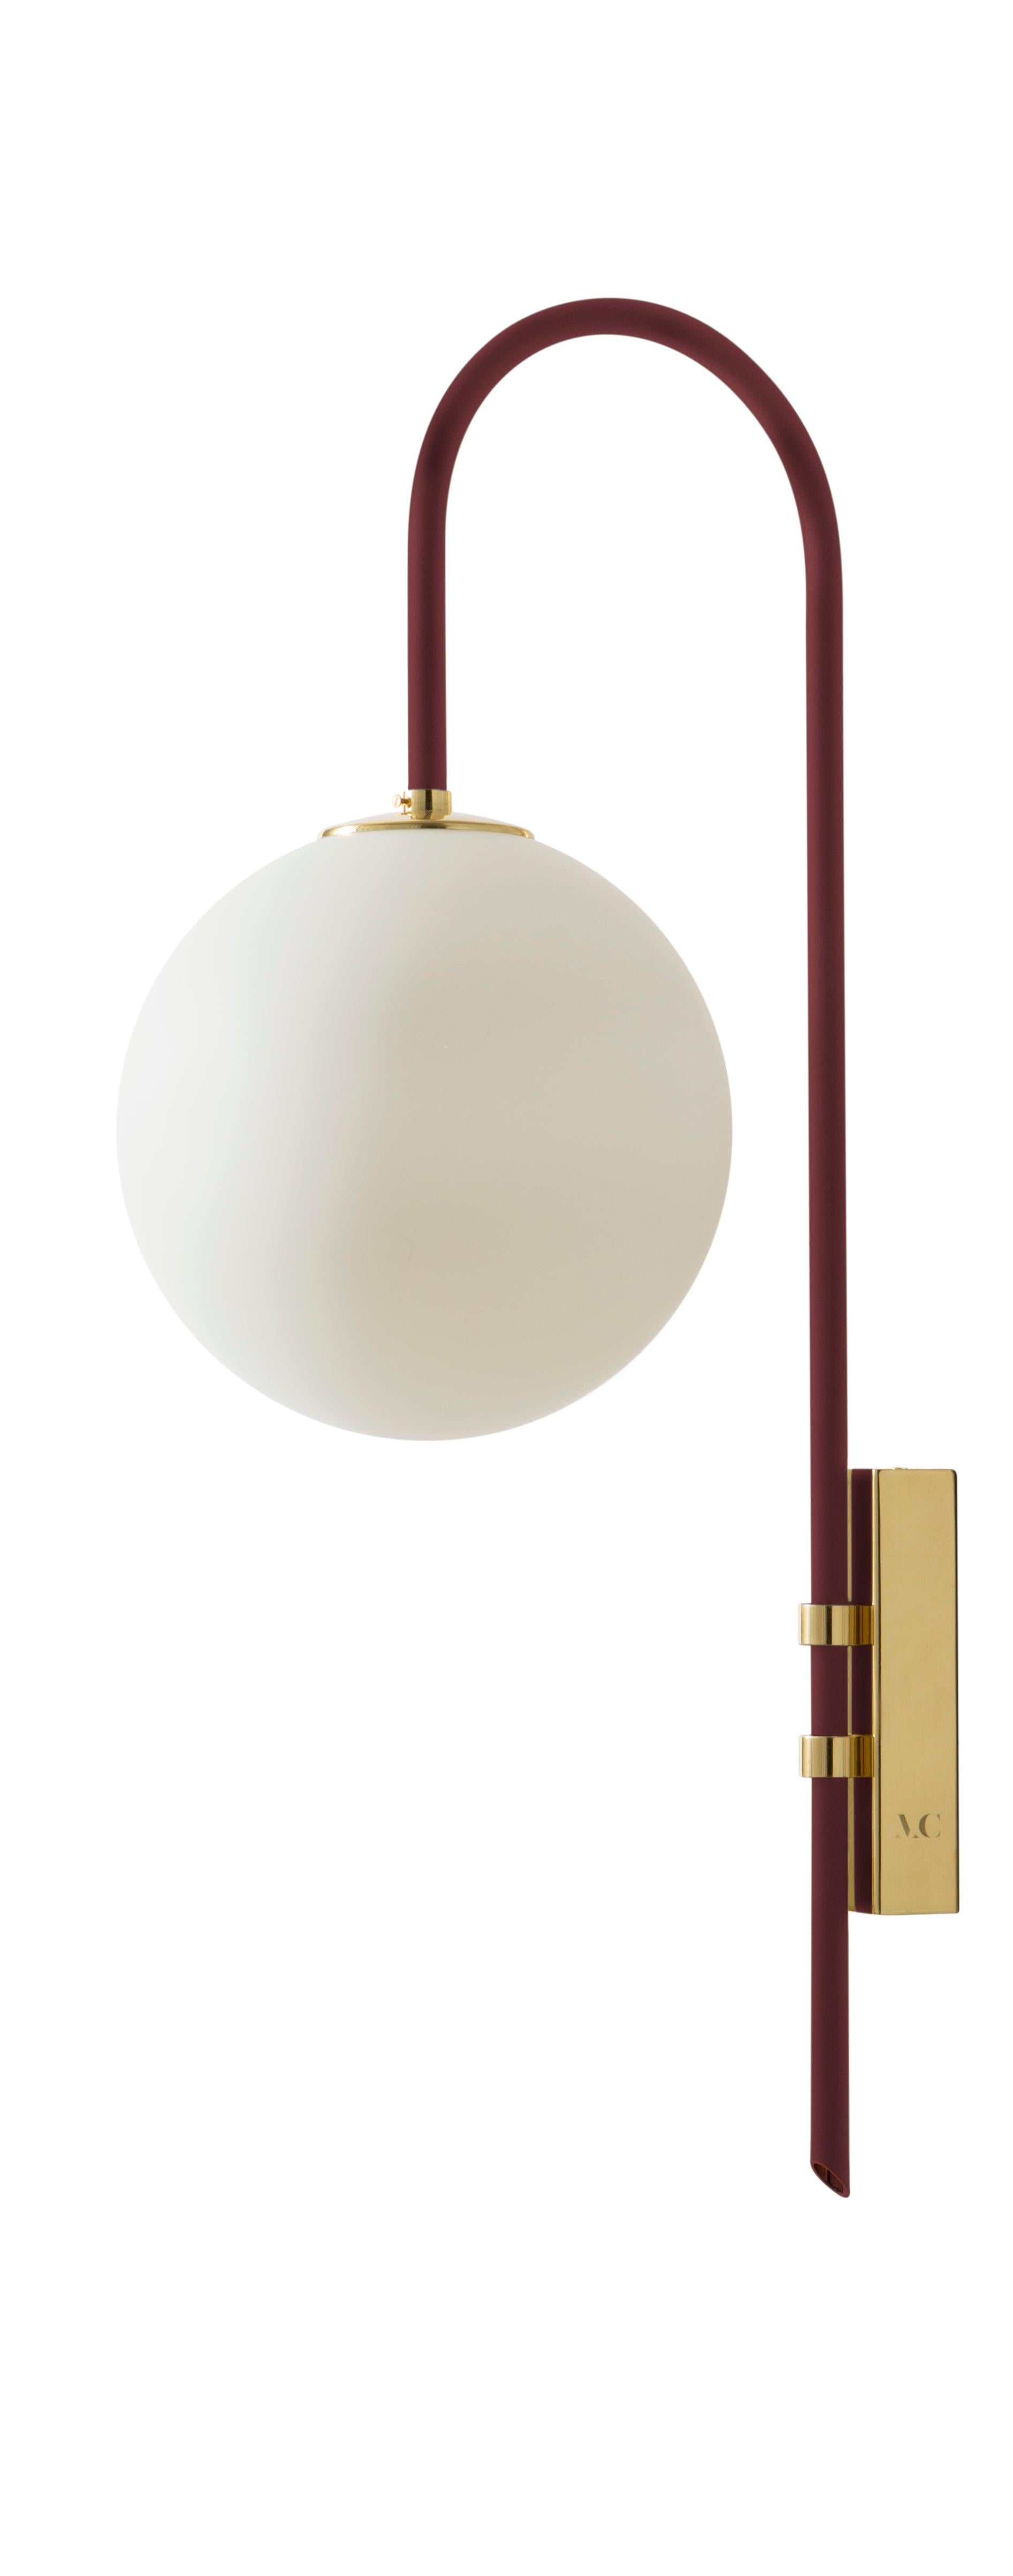 Red brass wall lamp 06 by Magic Circus Editions
Dimensions: H 77 x W 25 x D 36.5 cm
Materials: Smooth brass, mouth blown glass
Sphere dimensions: 25 cm

Available finishes: Brass, nickel
All our lamps can be wired according to each country. If